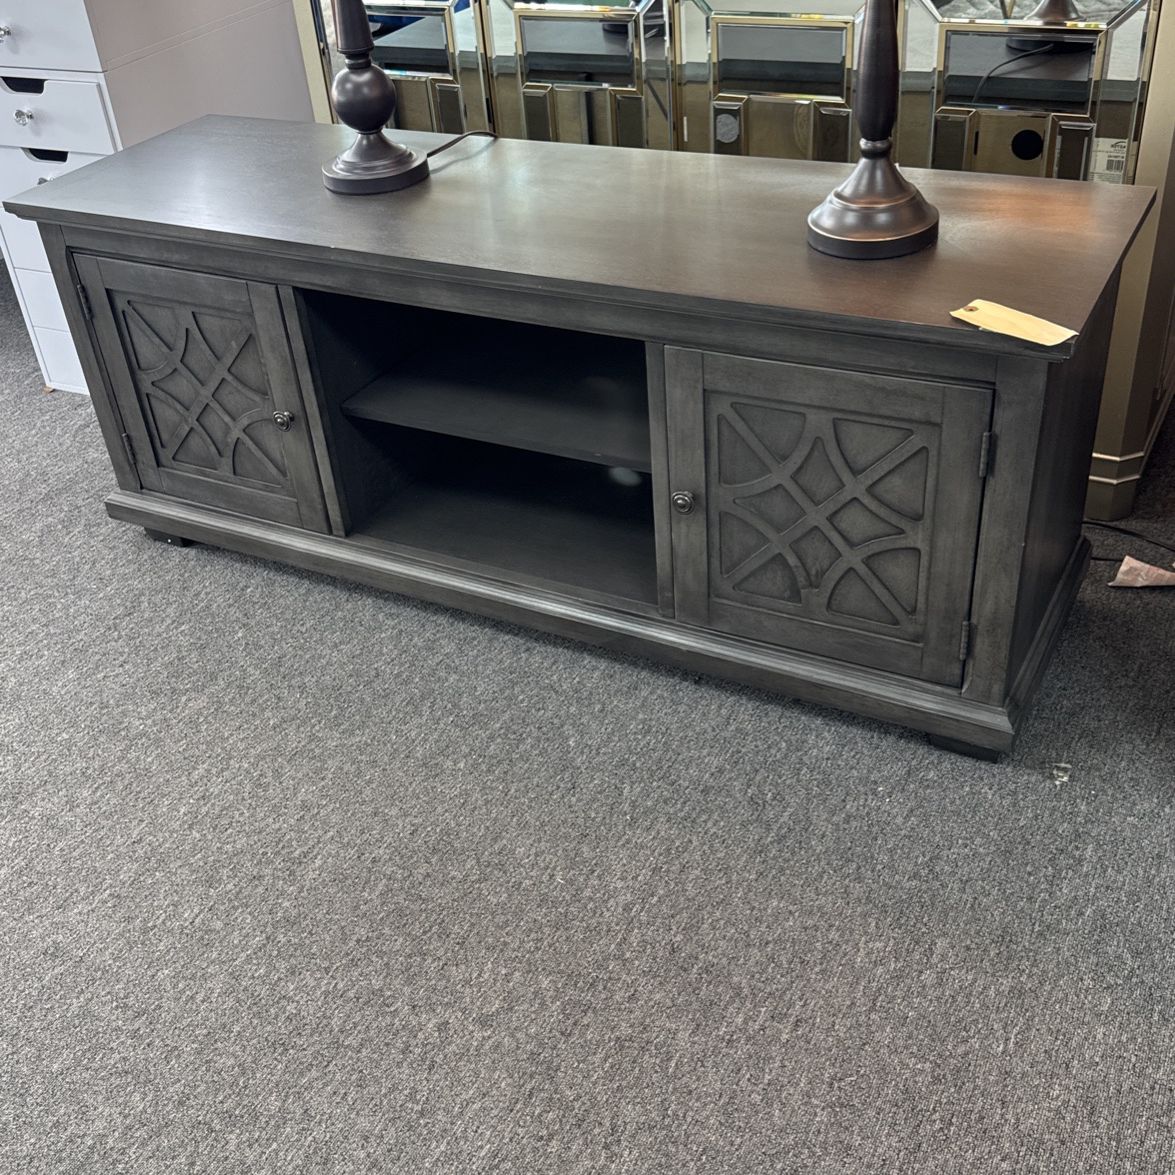 Tv Stand Starting At $200